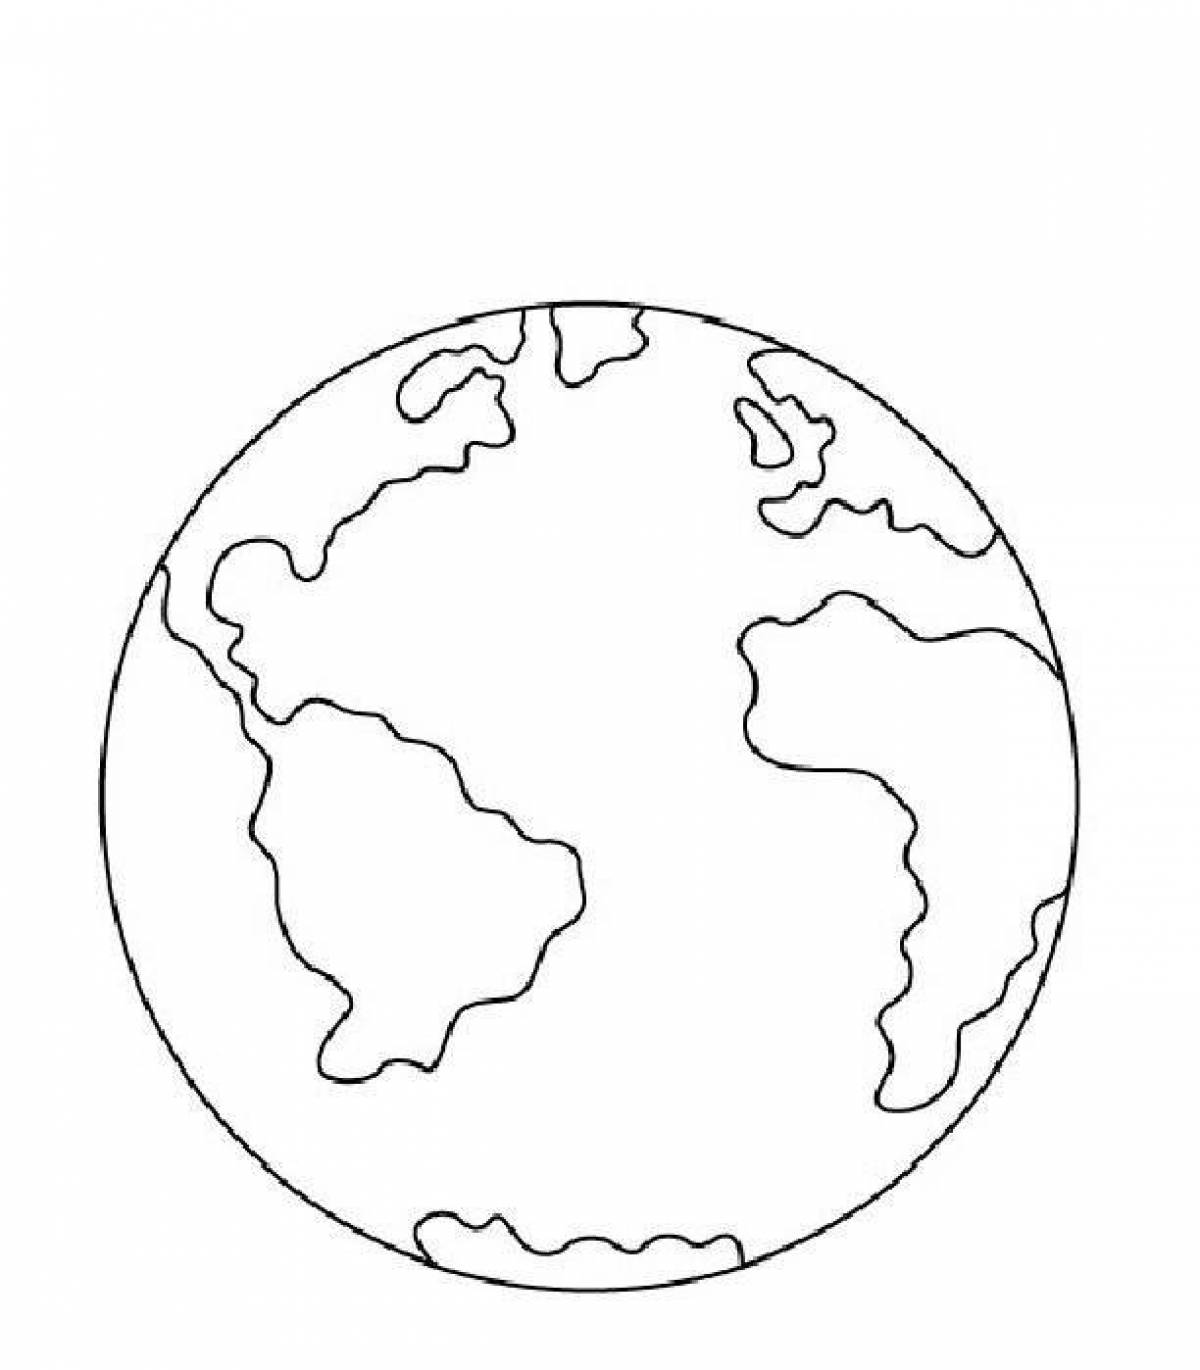 Colorful planet earth coloring page for kids